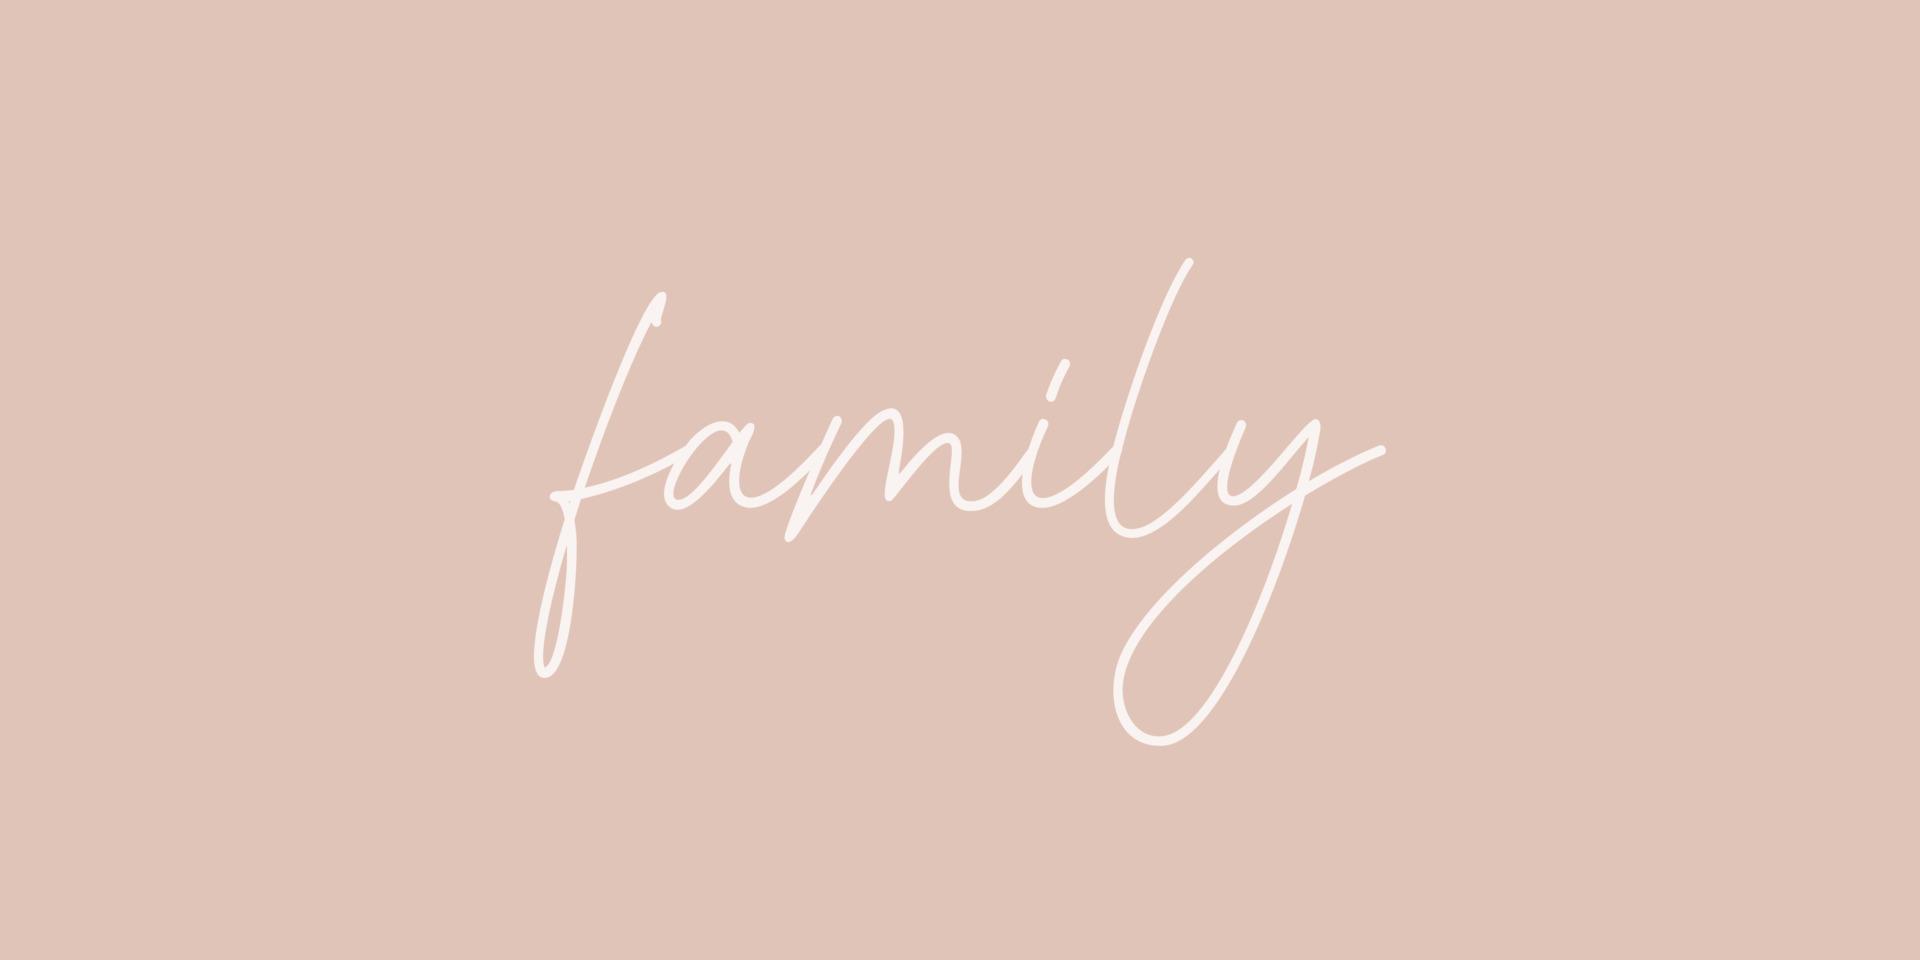 family - hand drawn calligraphy and lettering inscription. vector